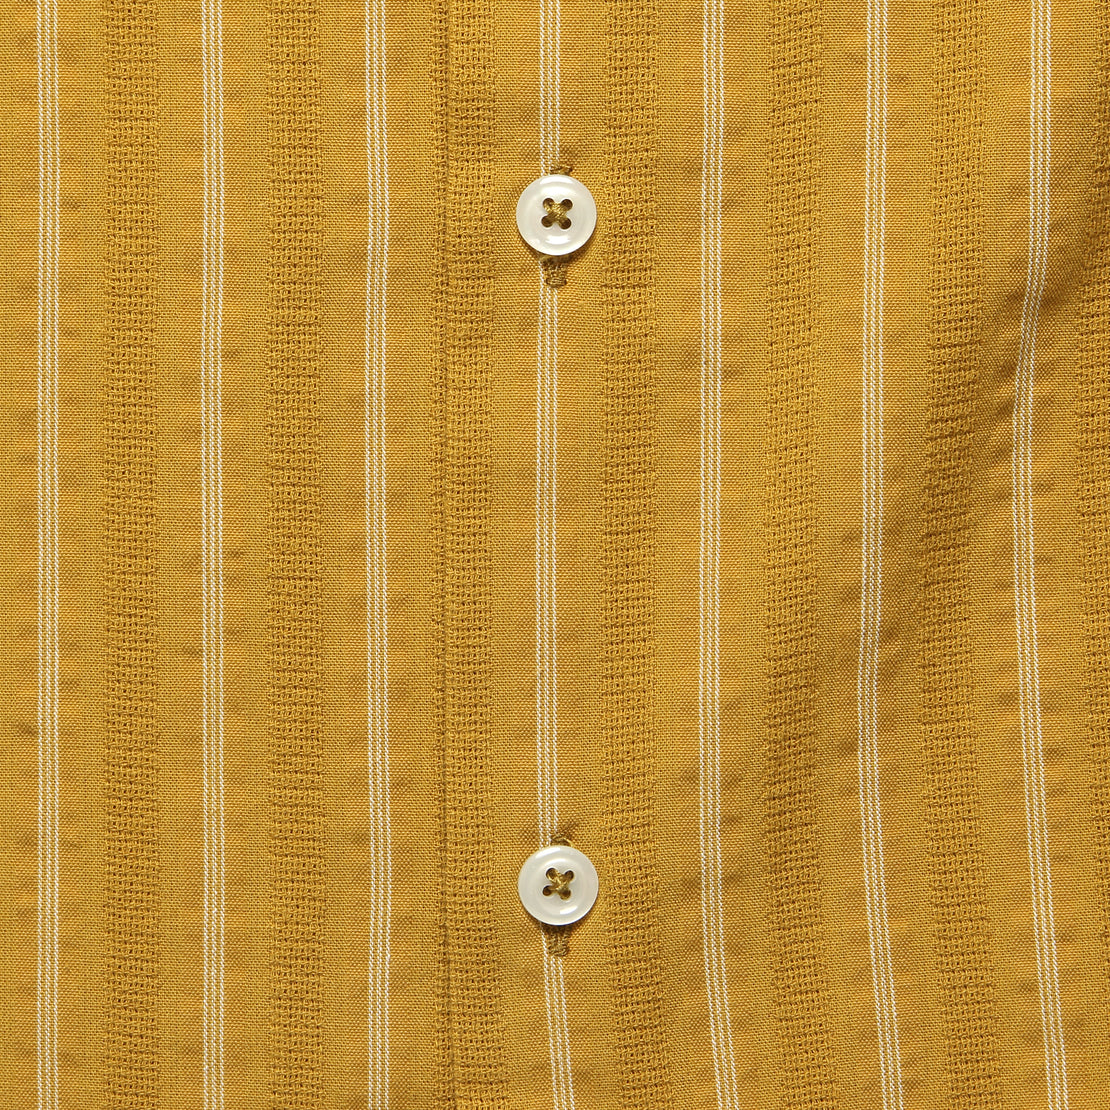 Maui Stripe Camp Shirt - Mustard - Universal Works - STAG Provisions - Tops - S/S Woven - Stripe